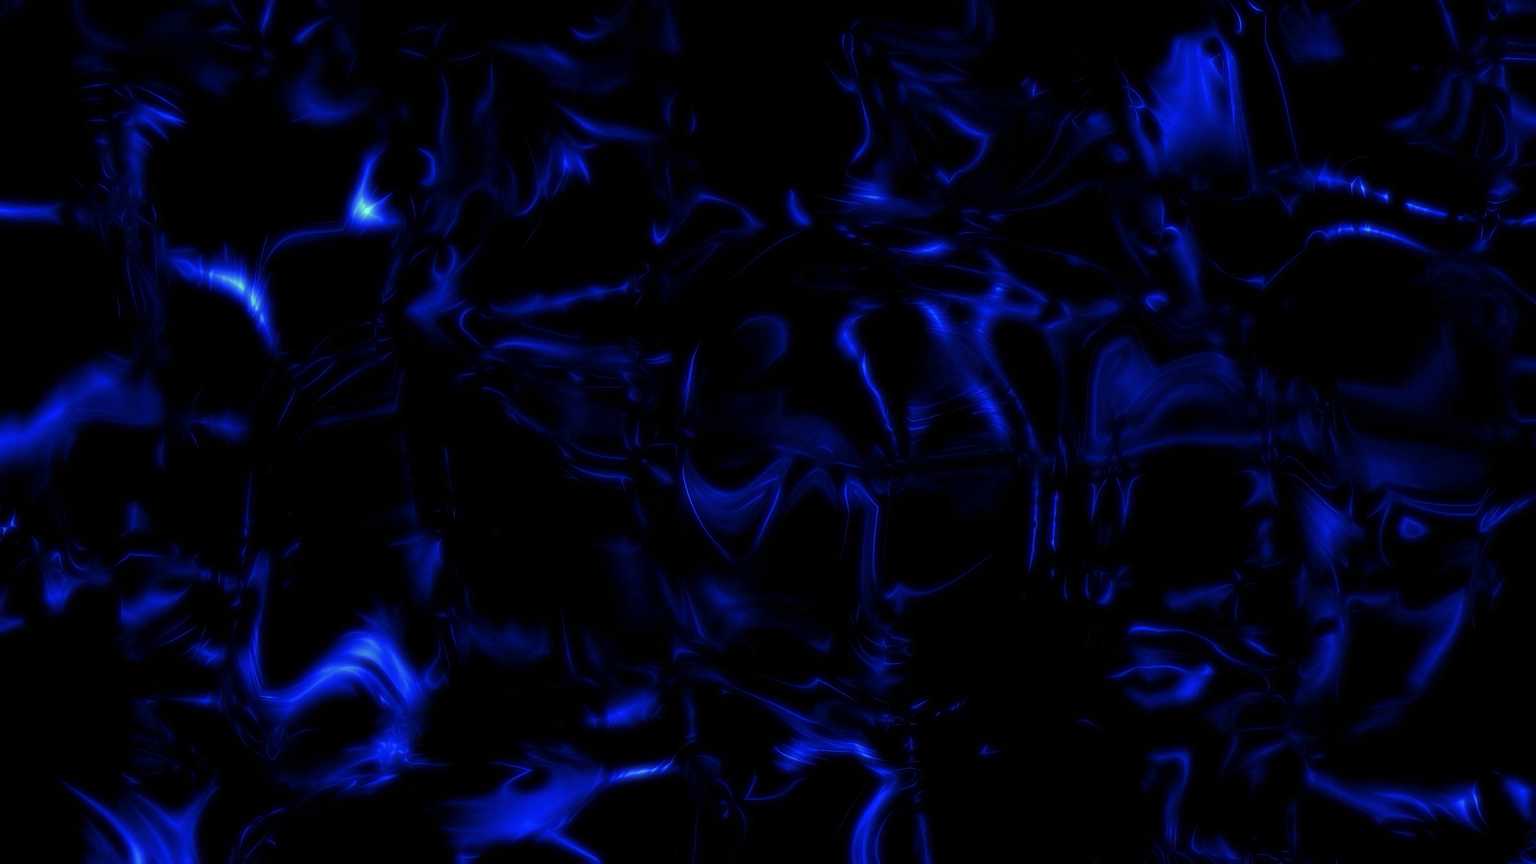 4K Blue Liquid Looped Motion Background || VFX Free To Use 4K Screensaver